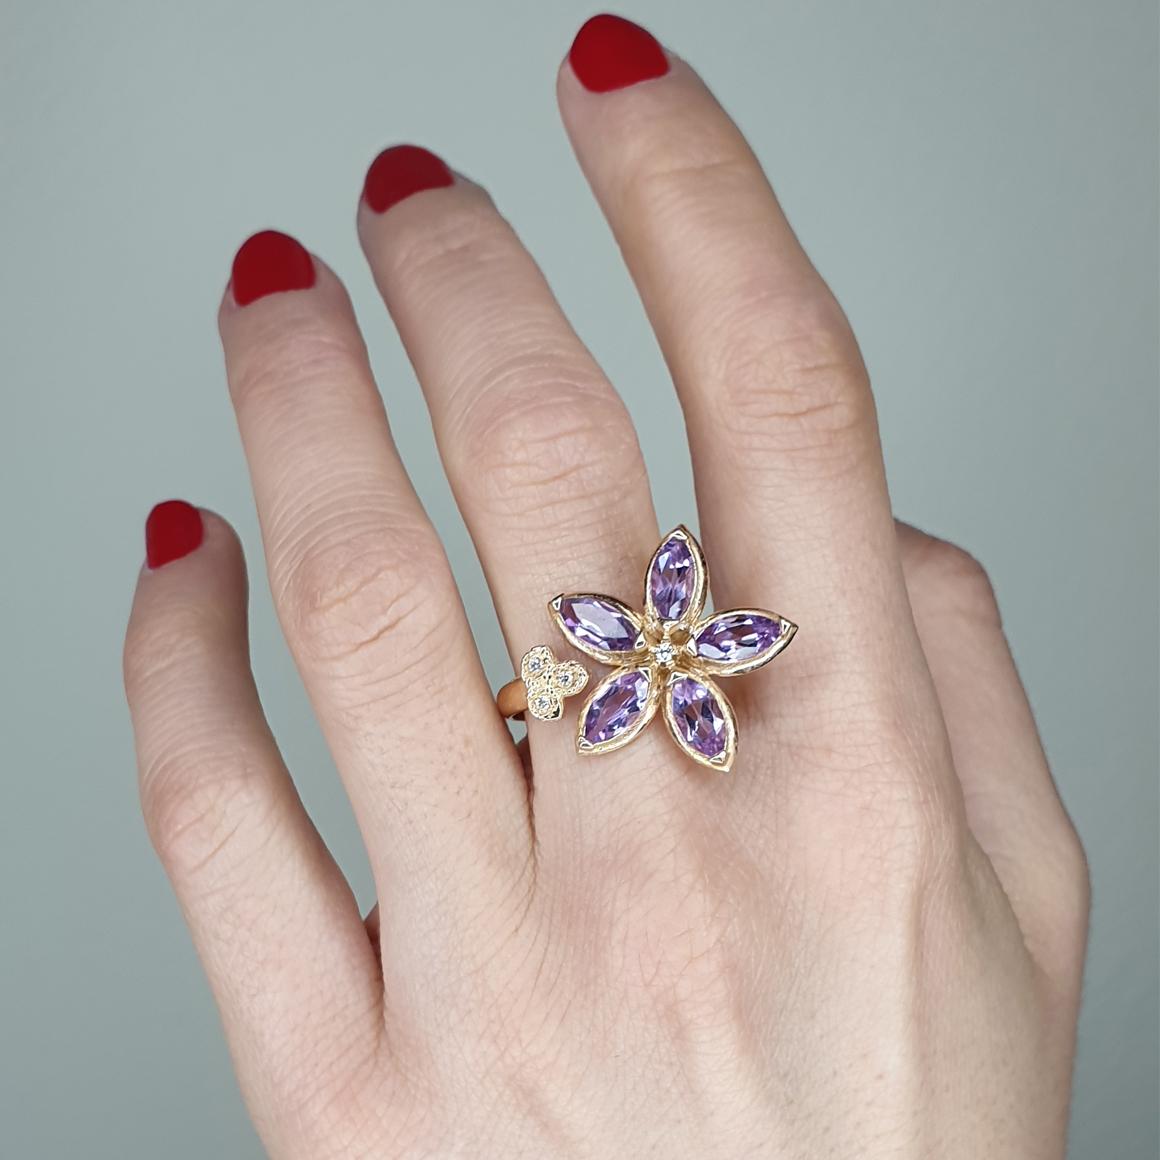 Ring in 18k rose gold with Amethyst (marquise cut, size: mm) and white Diamonds cts0.07 VS colour G/H. 

Size of ring: 15 EU  - 7,5 USA    g. 6.10
(Possibility to have earrings in set)

All Stanoppi Jewelry is new and has never been previously owned